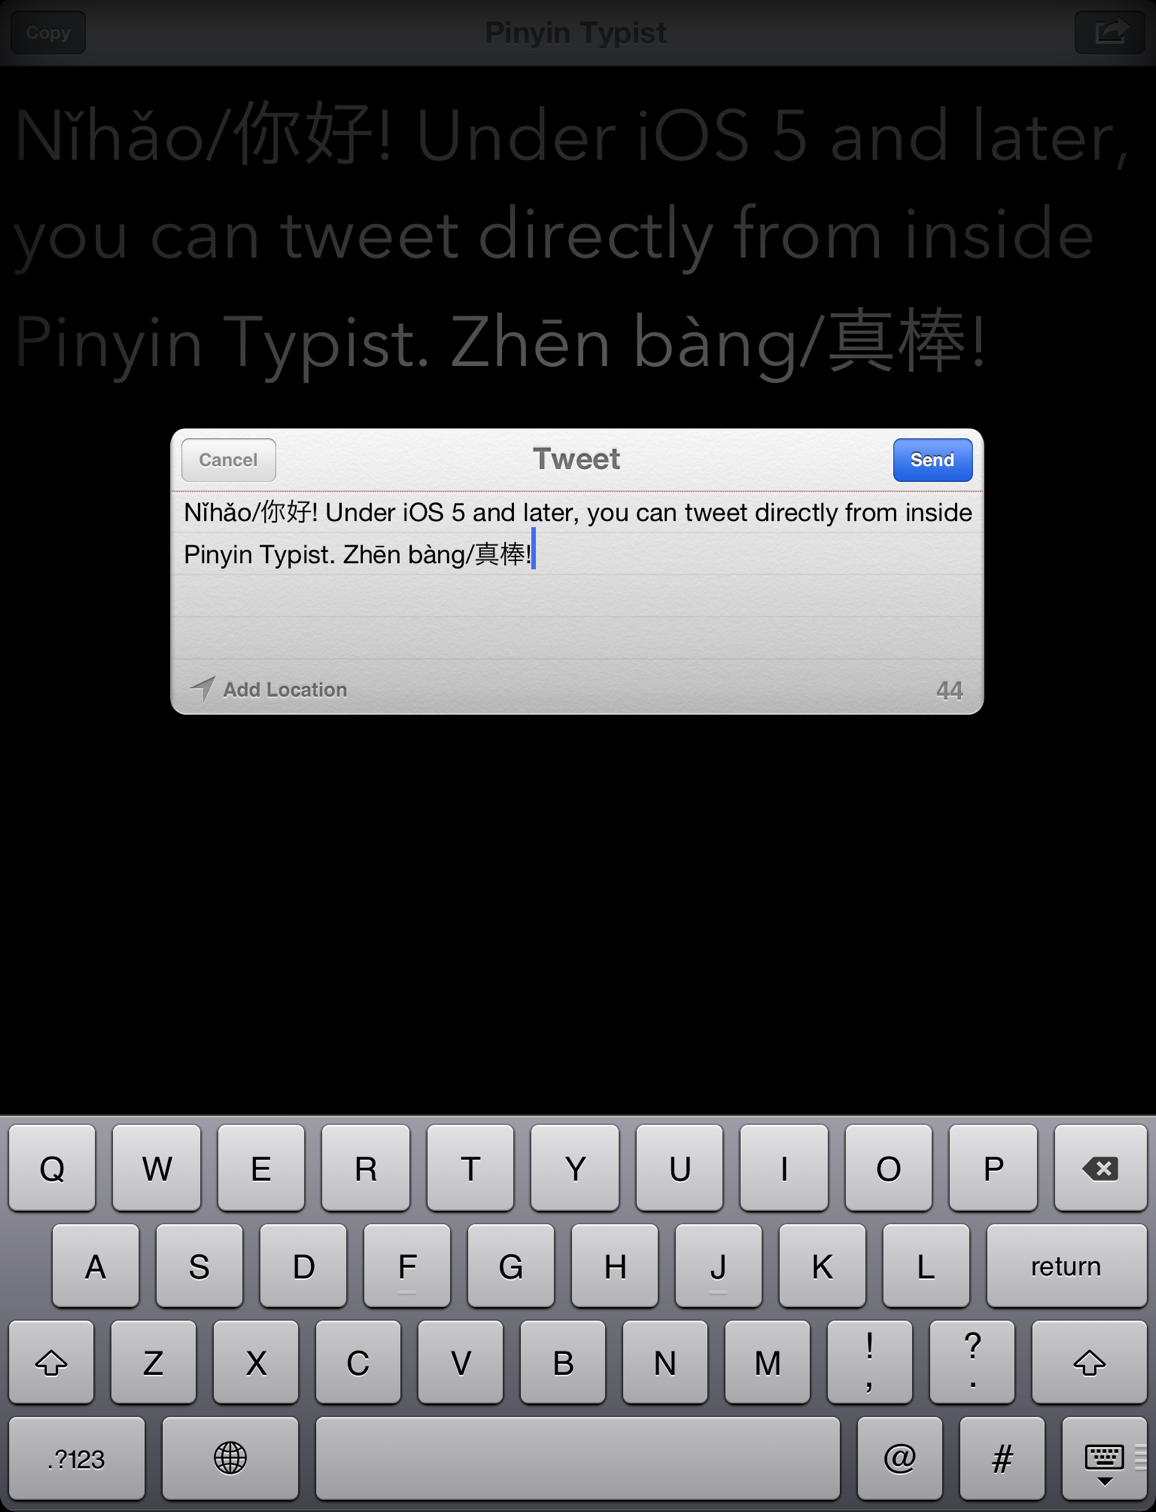 Screenshot: Under iOS 5 and later, tweet directly from Pinyin Typist